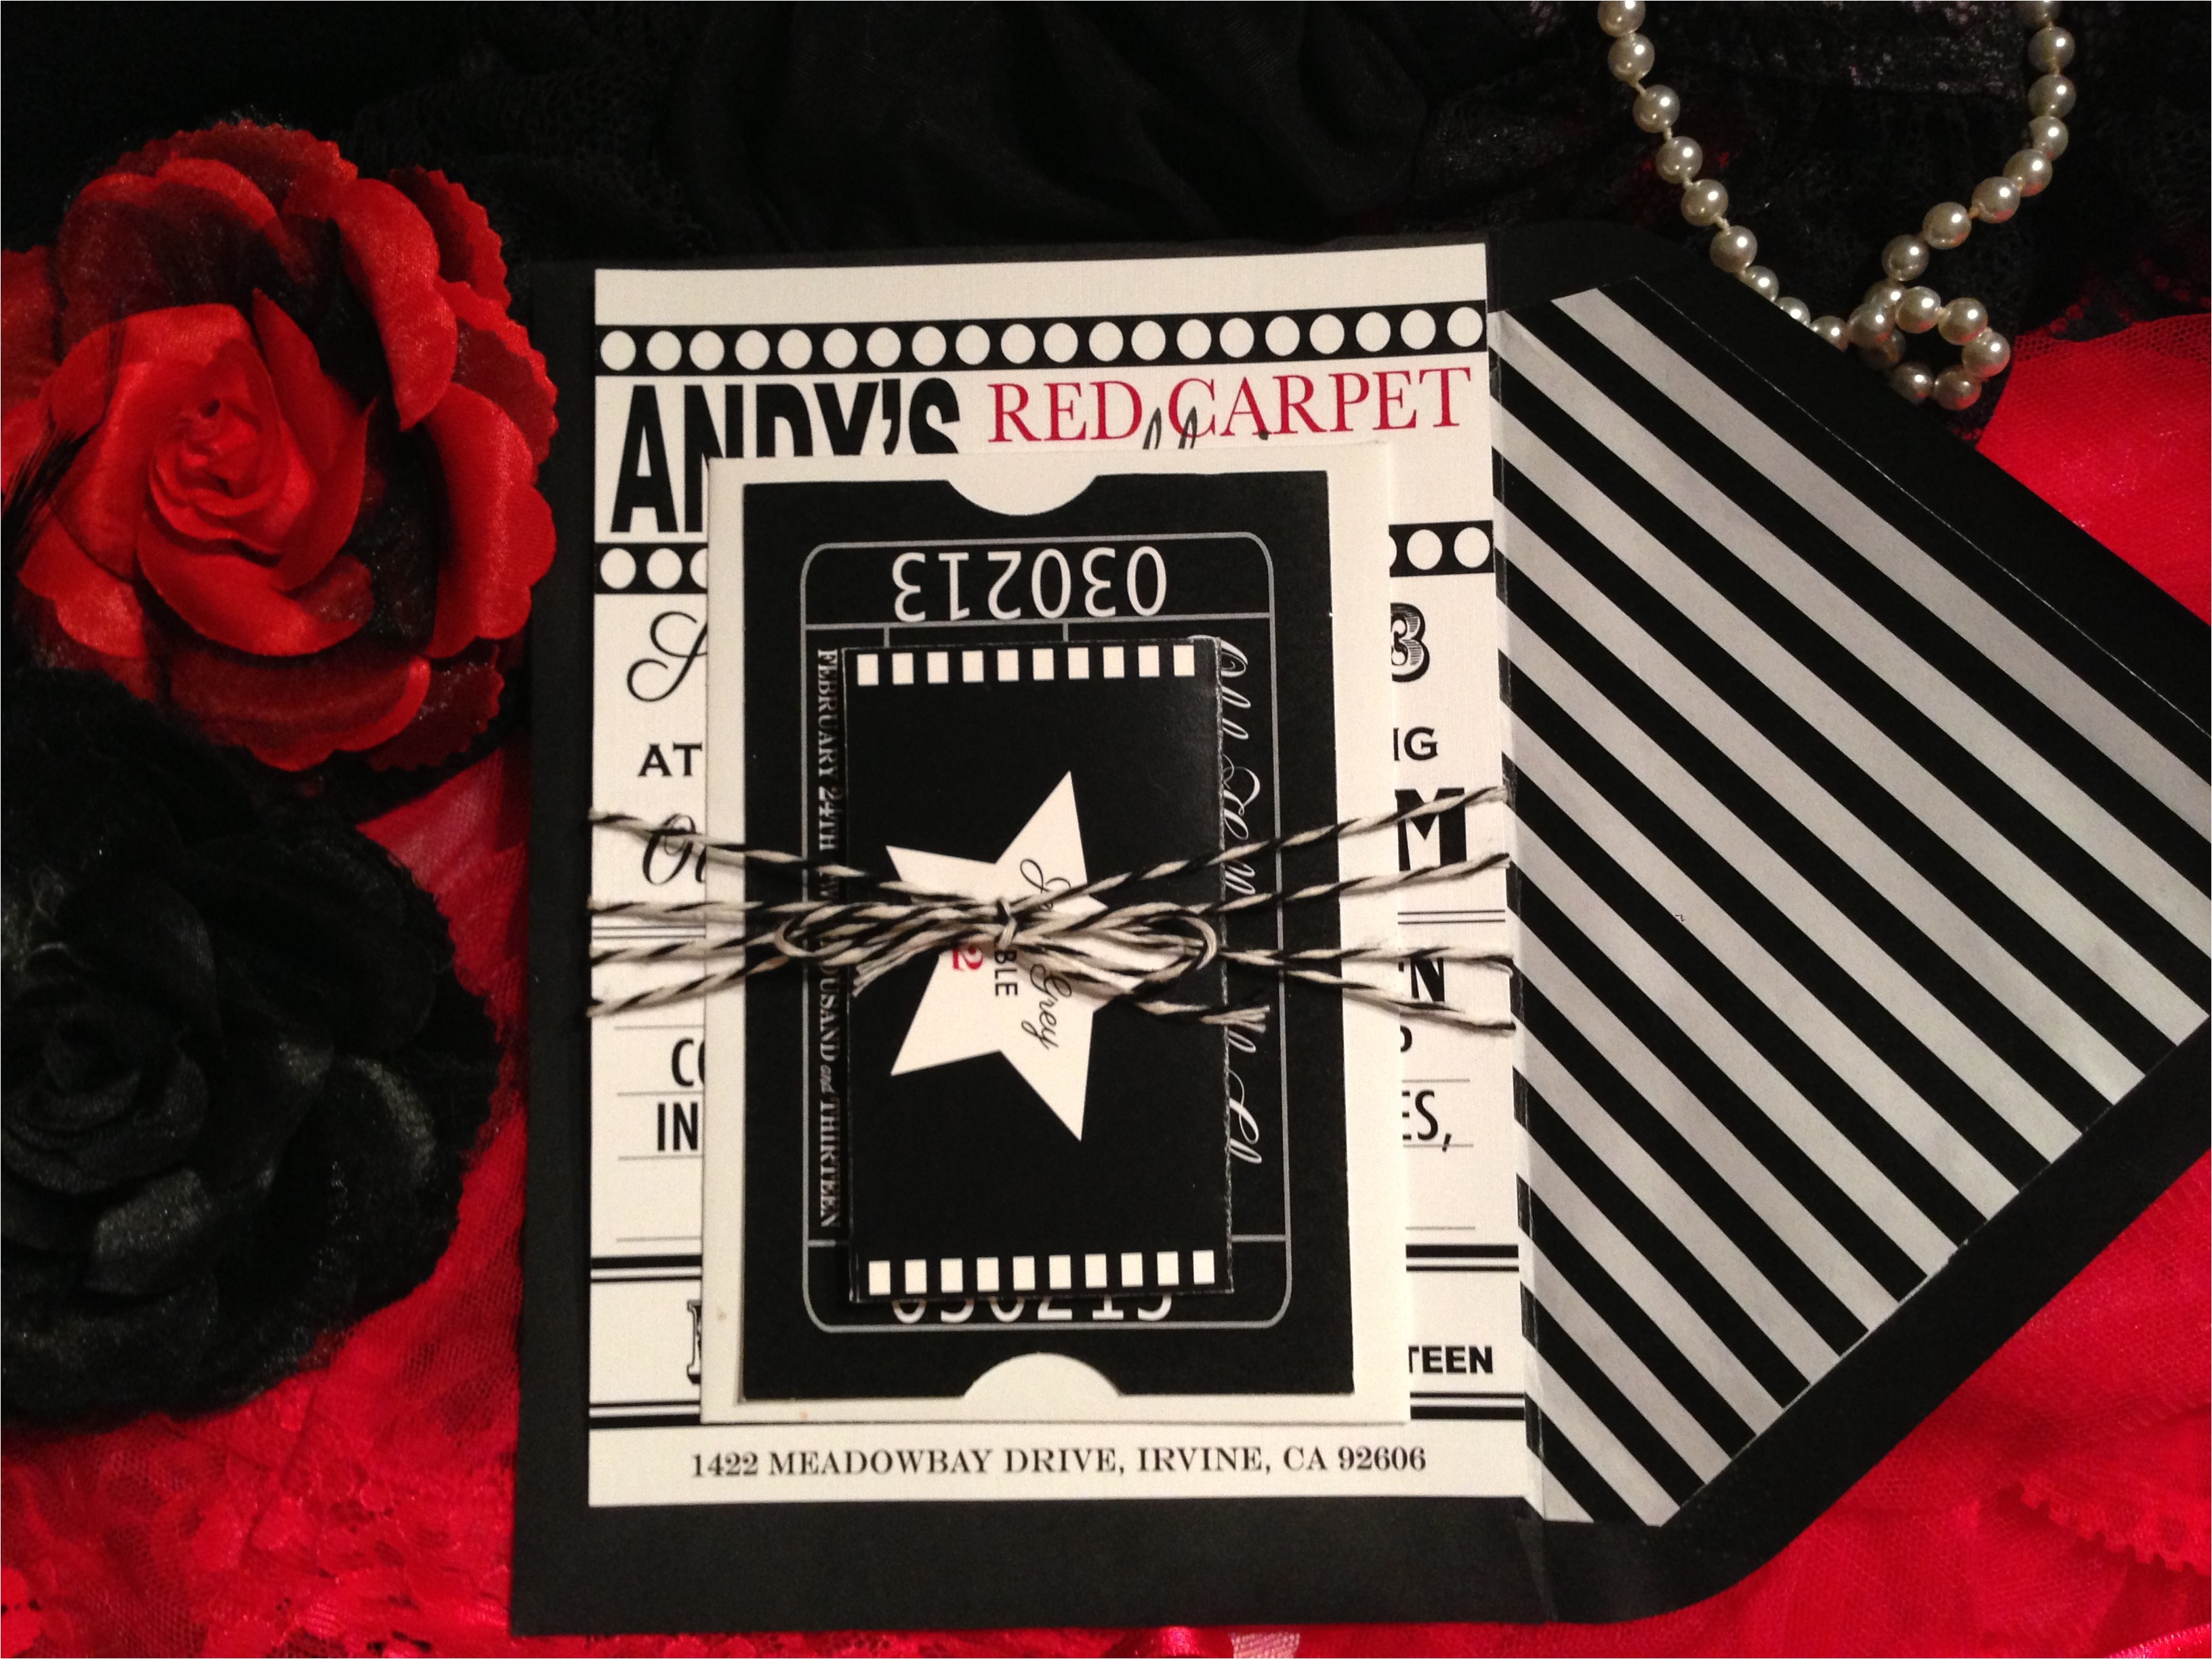 old hollywood party invitations